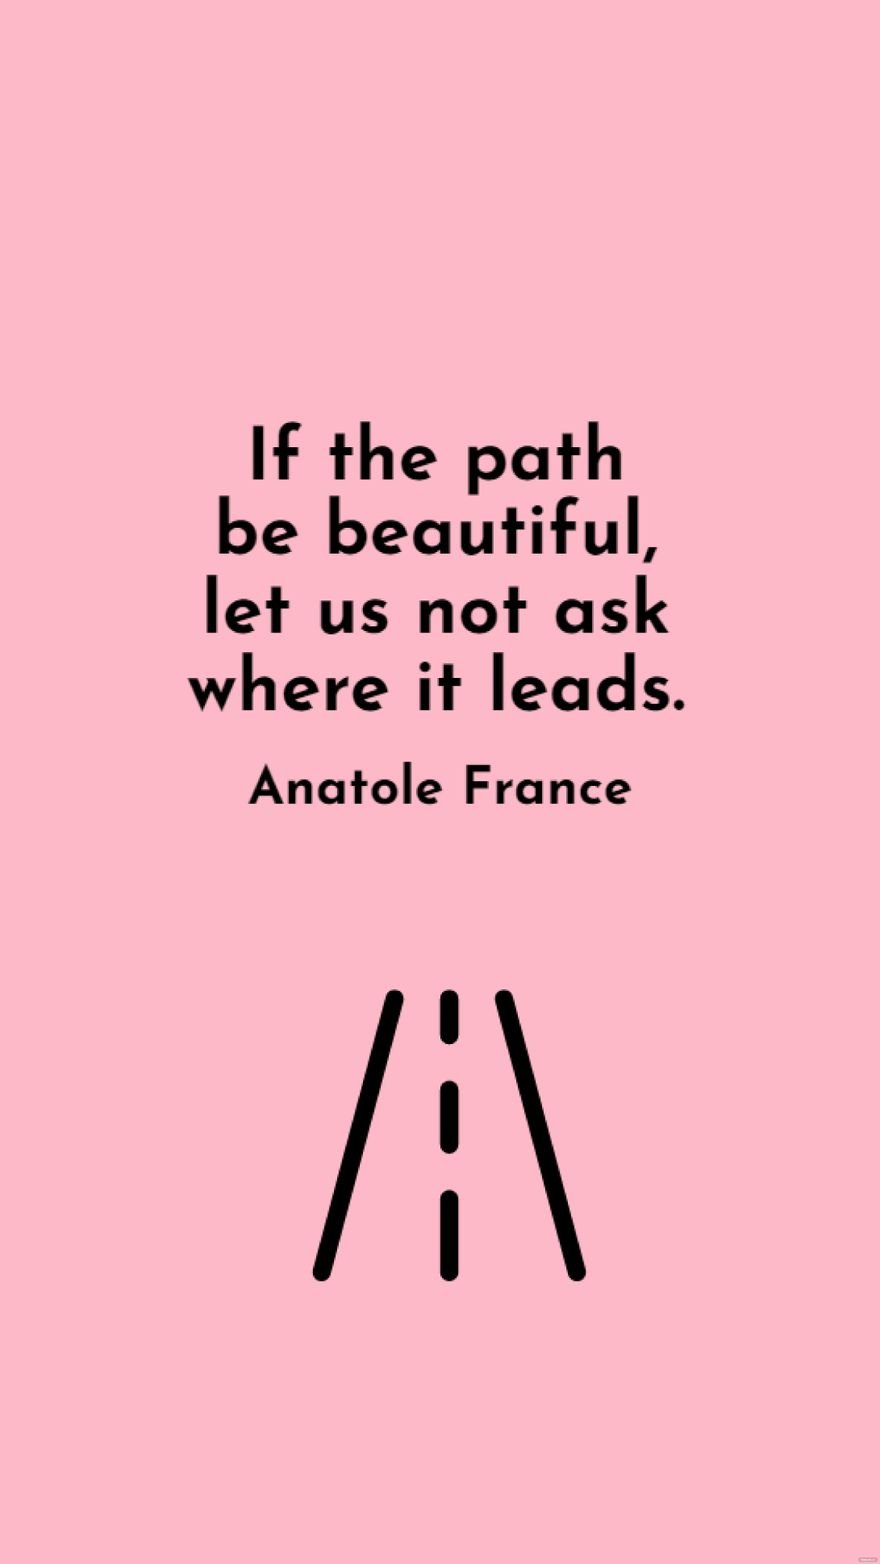 Anatole France - If the path be beautiful, let us not ask where it leads.